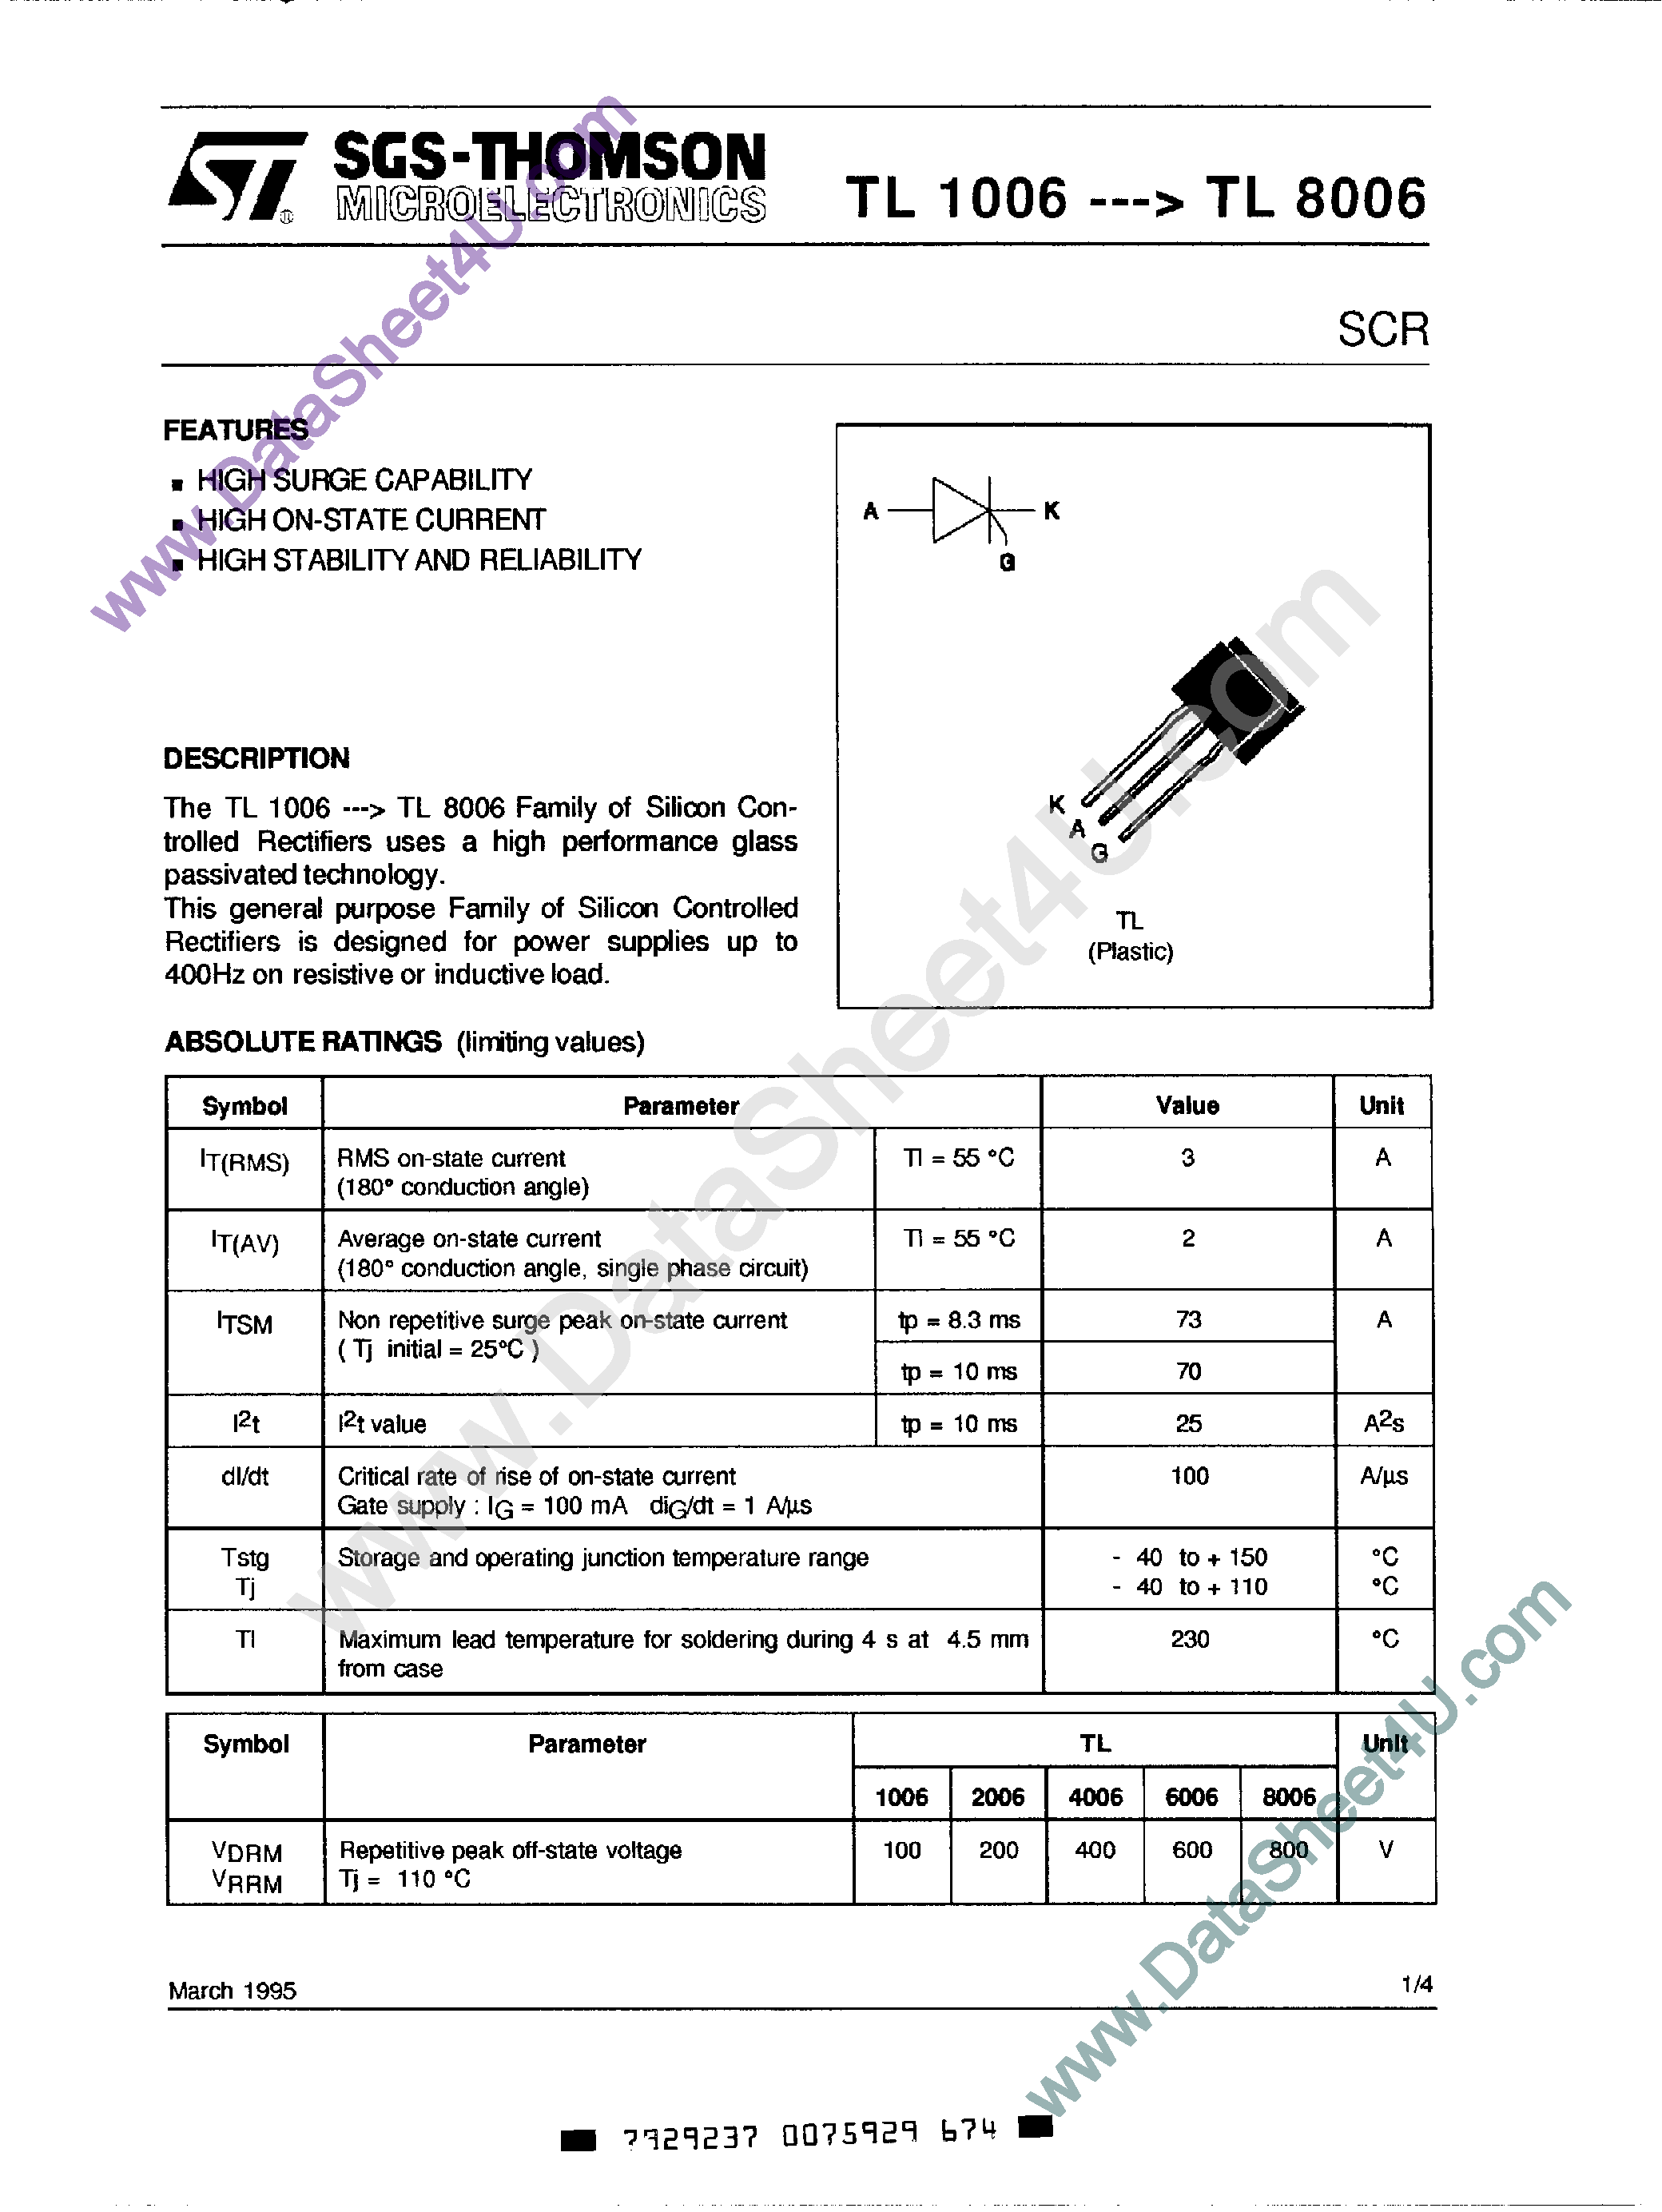 Datasheet TL2006 - SCR page 1